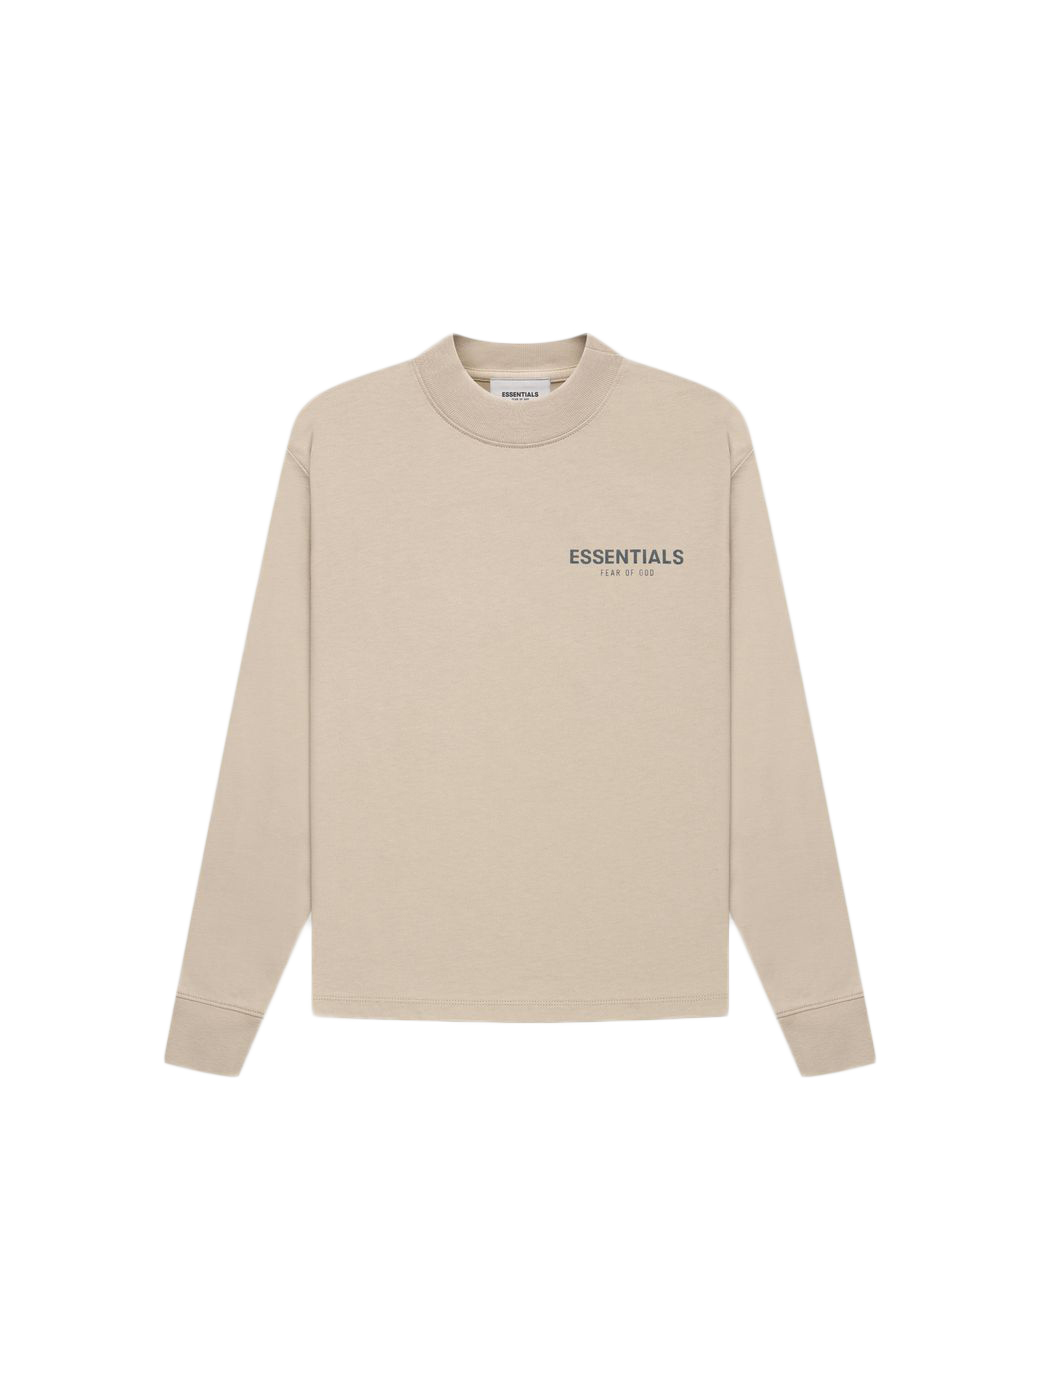 Fear of God Essentials Core Collection Kids L/S T-shirt String